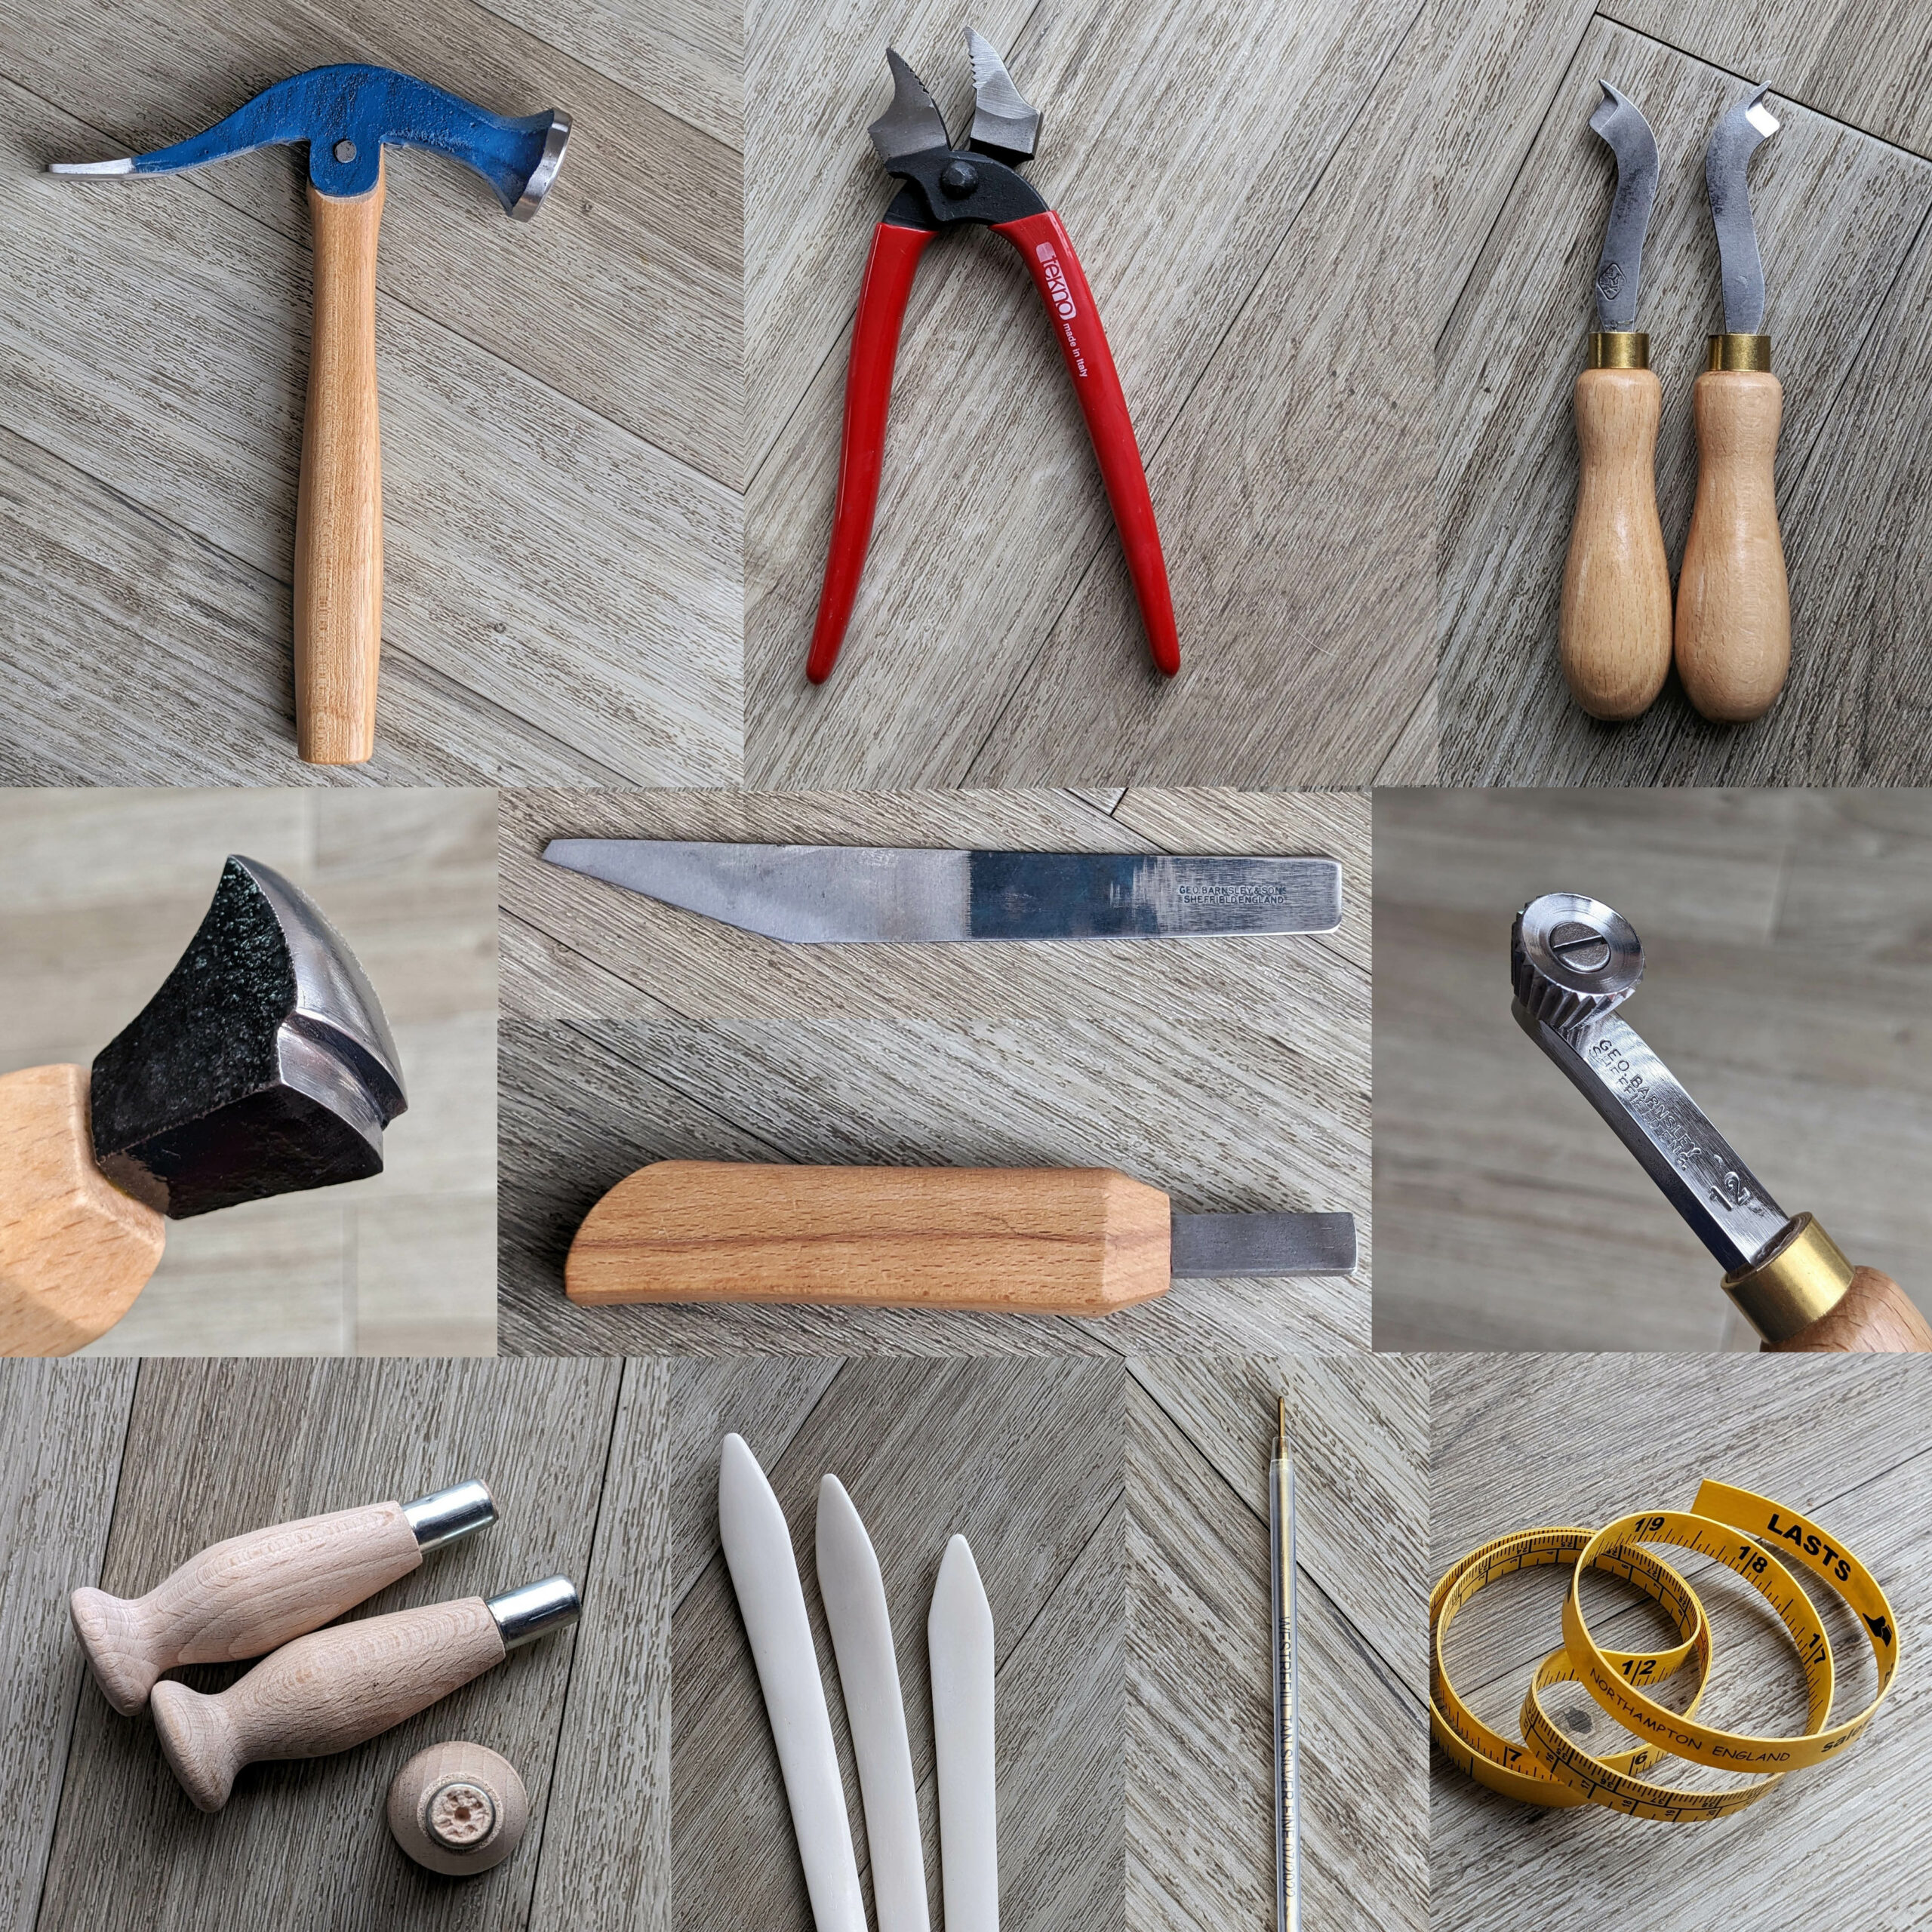 Tools You Need to Build a Shop for Knife Making